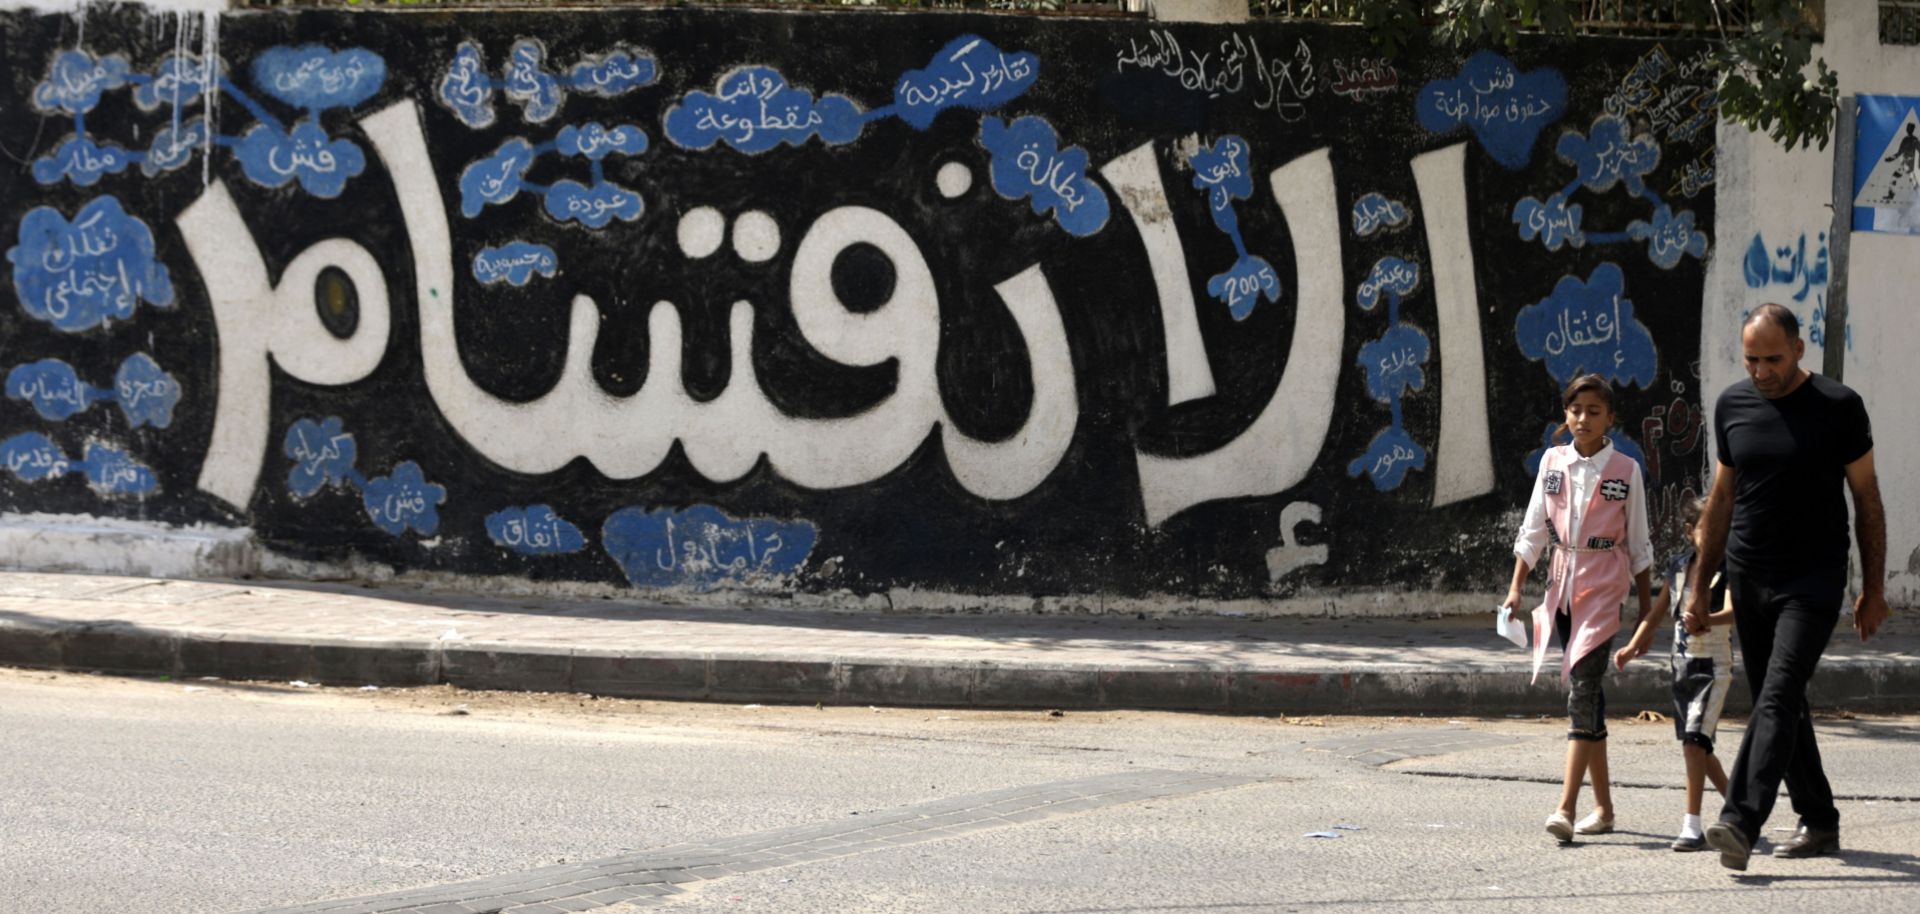 A Palestinian man walks through Gaza with two of his daughters in front of a wall graffitied with the Arabic word for division.